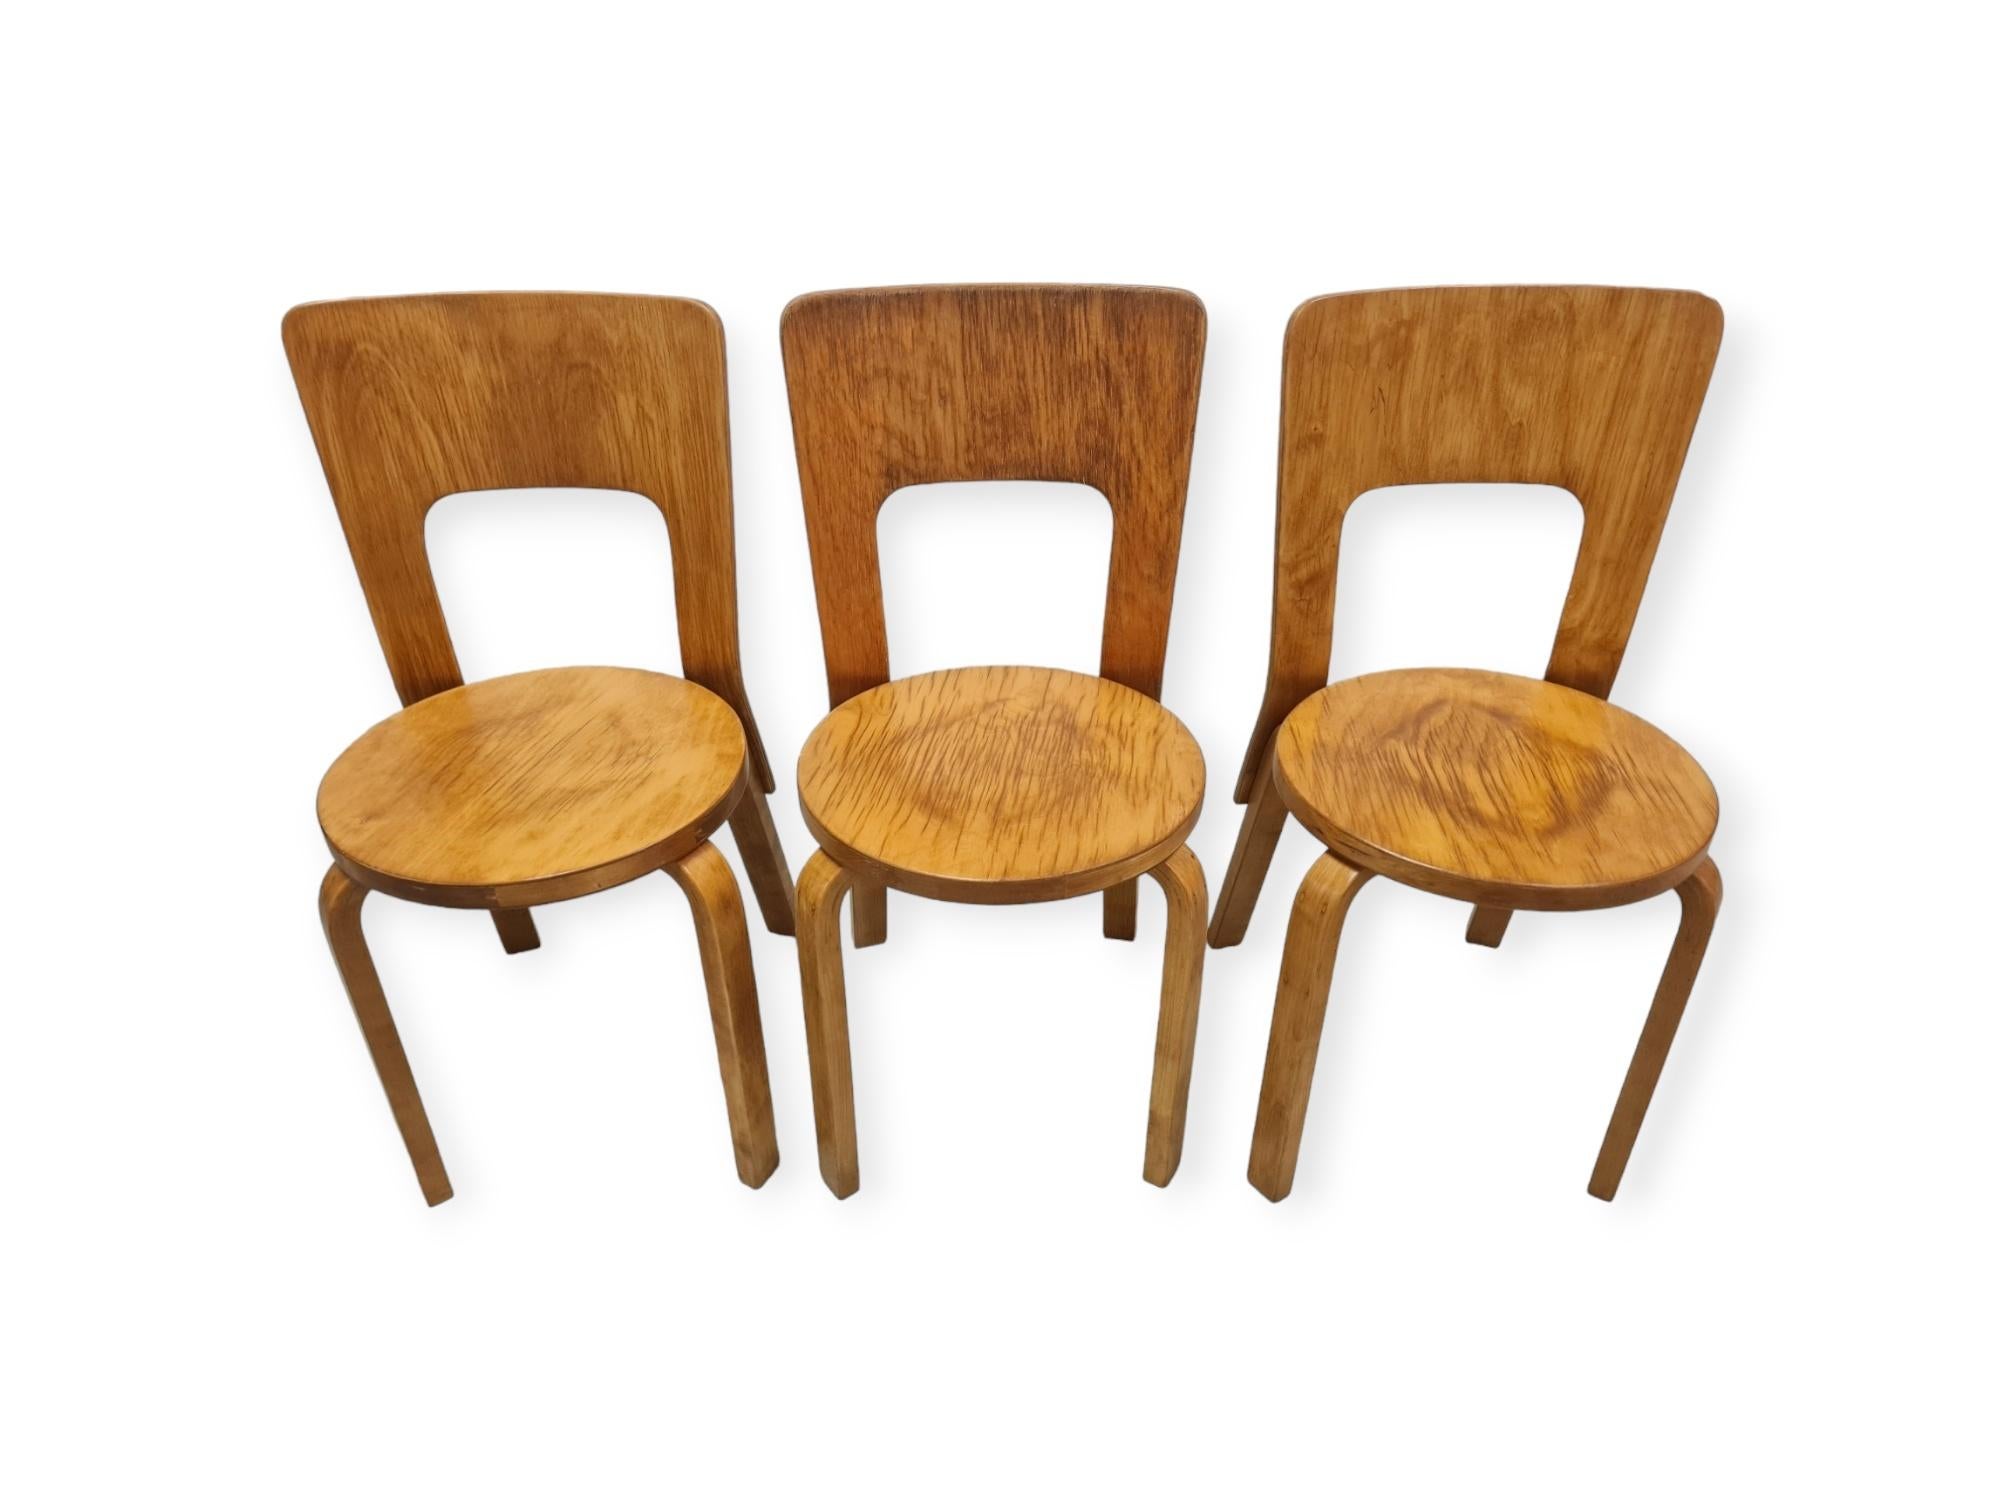 Alvar Aalto Dining Set with Lazy Susan and 6 Model 66 chairs, 1940s For Sale 9